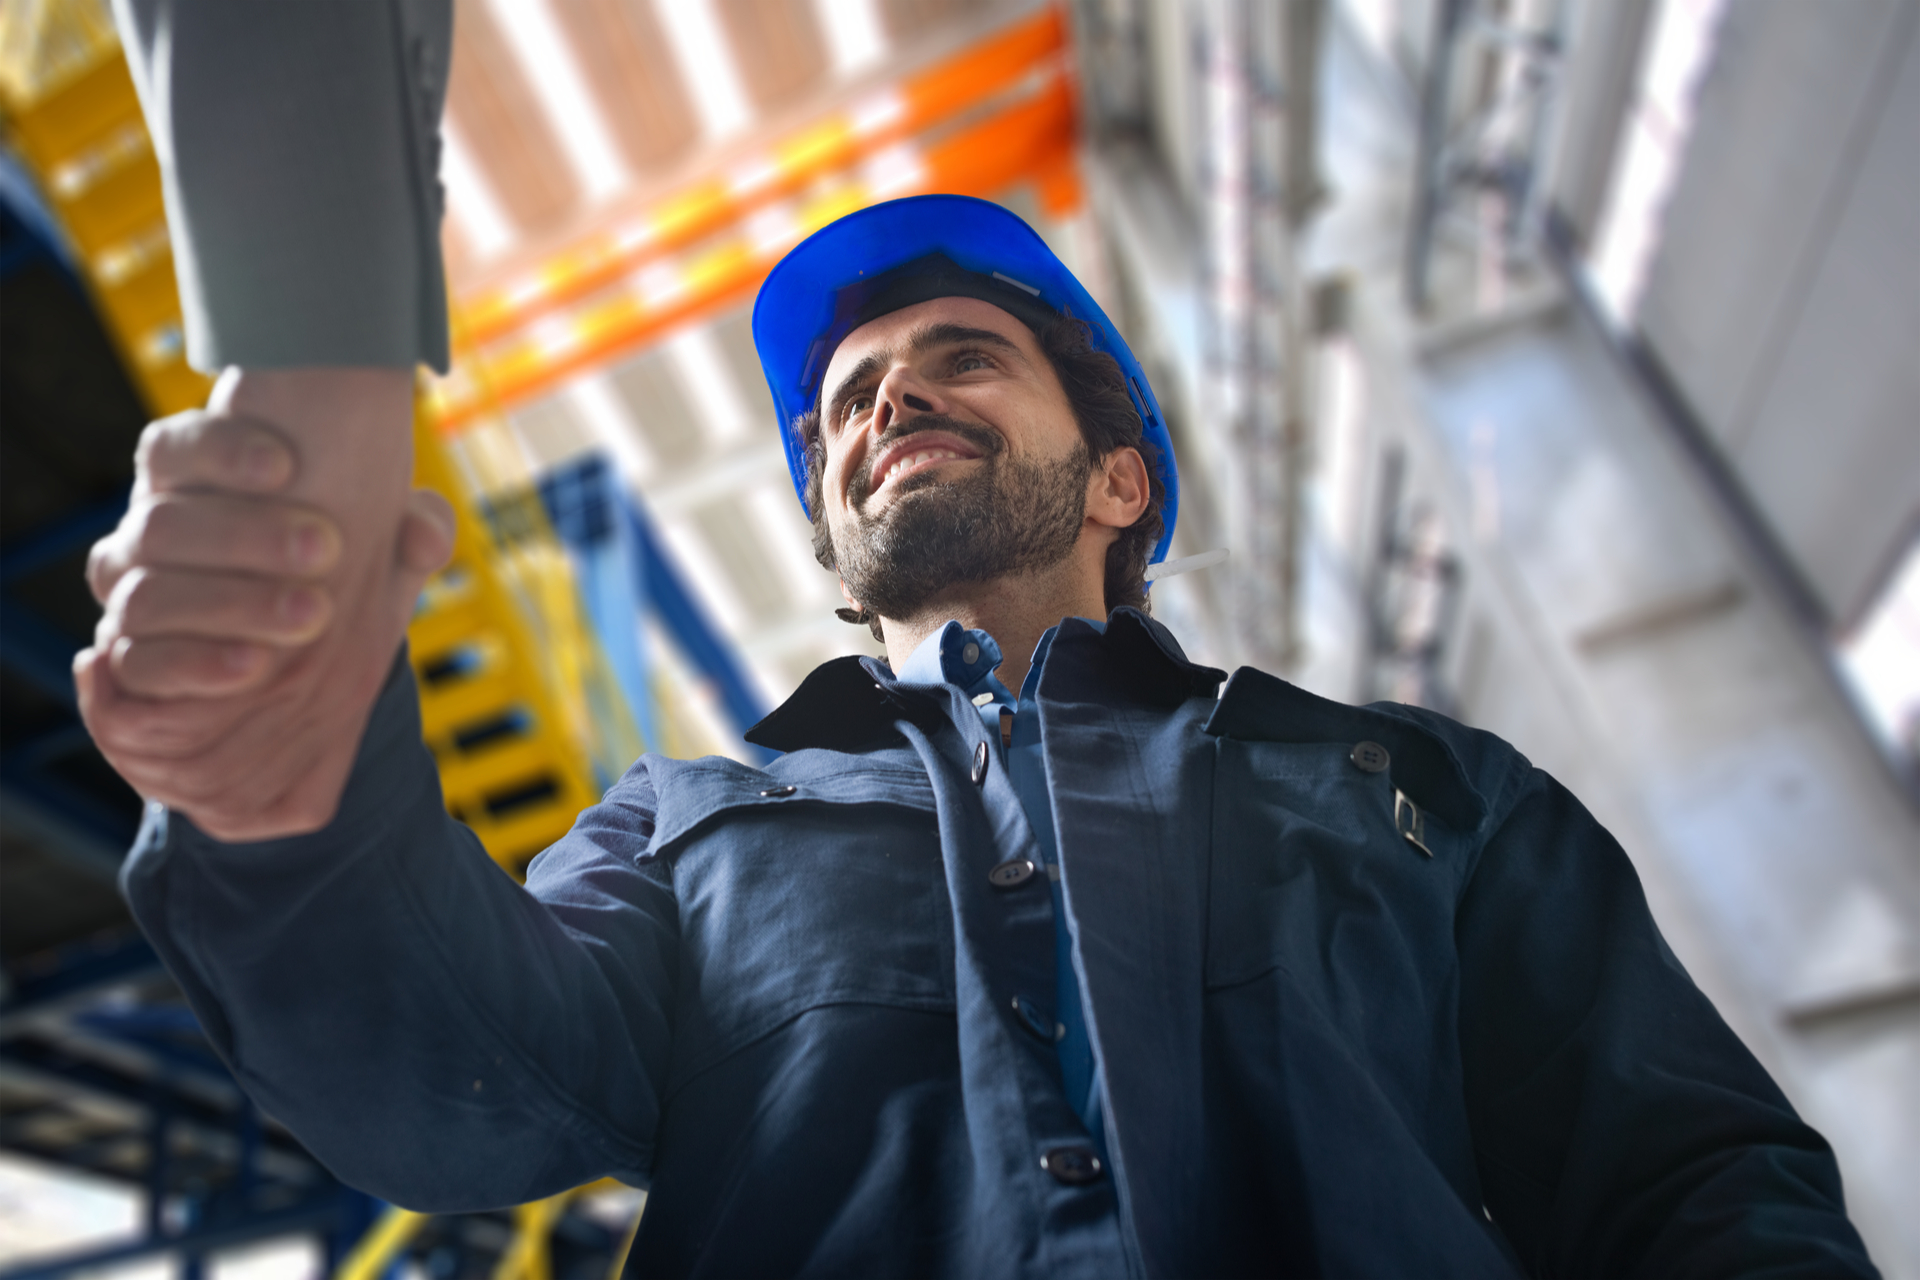 Portrait of a man giving an handshake in an industrial facility